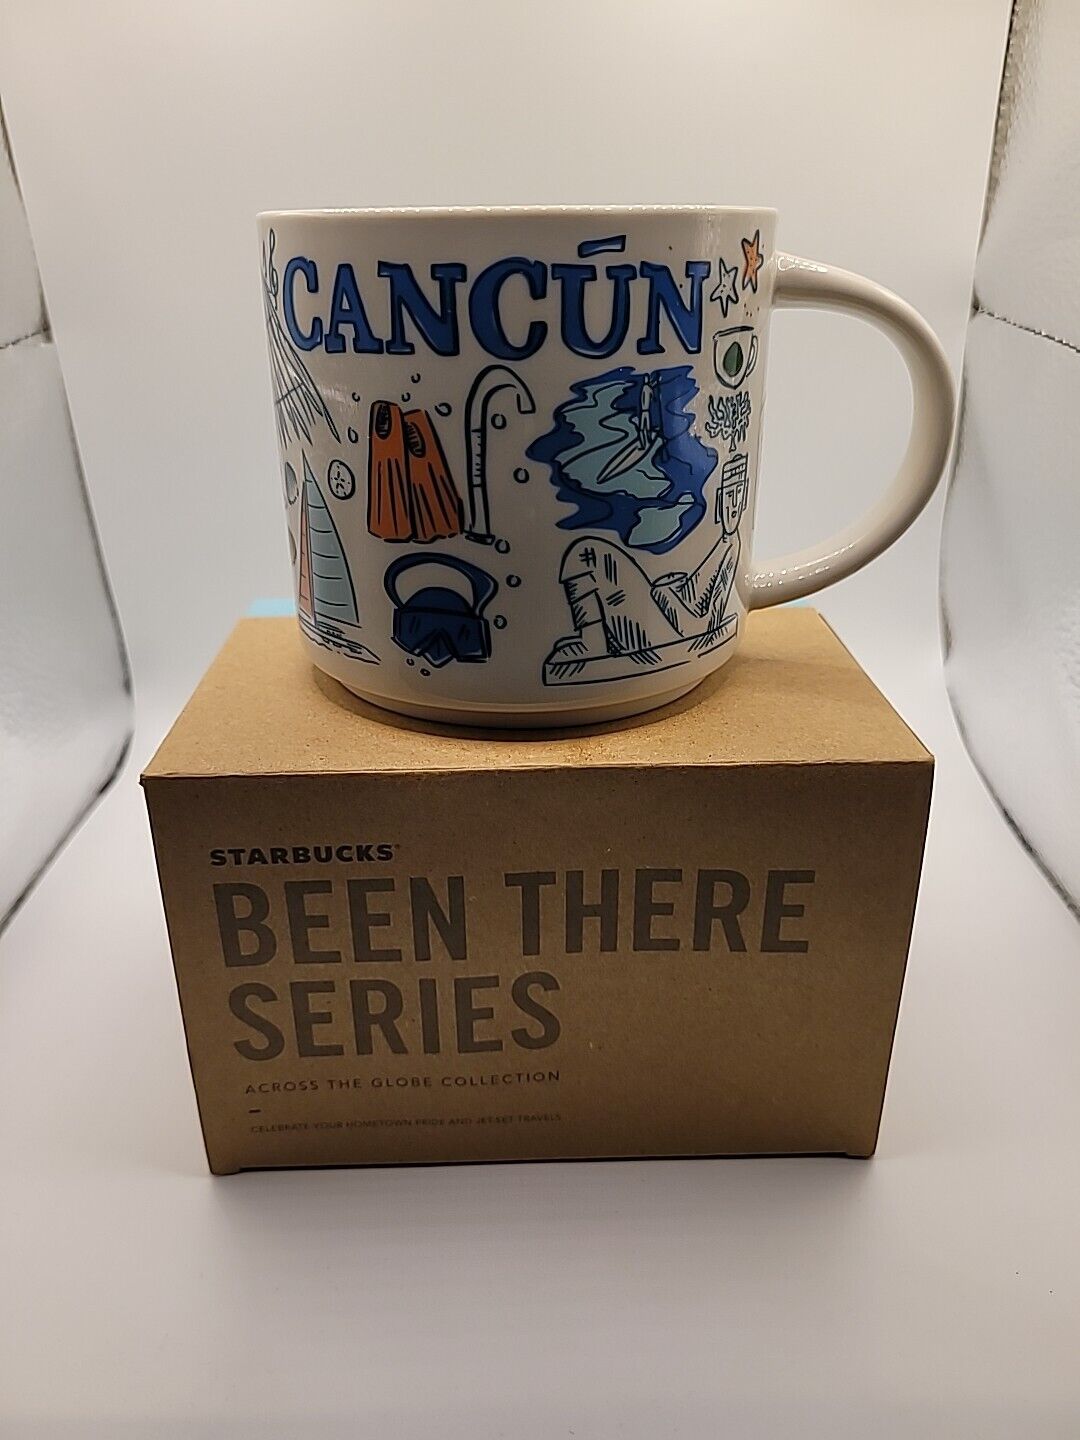 Starbucks 2022 Cancun, Mexico Been There Collection Coffee Mug NEW IN BOX